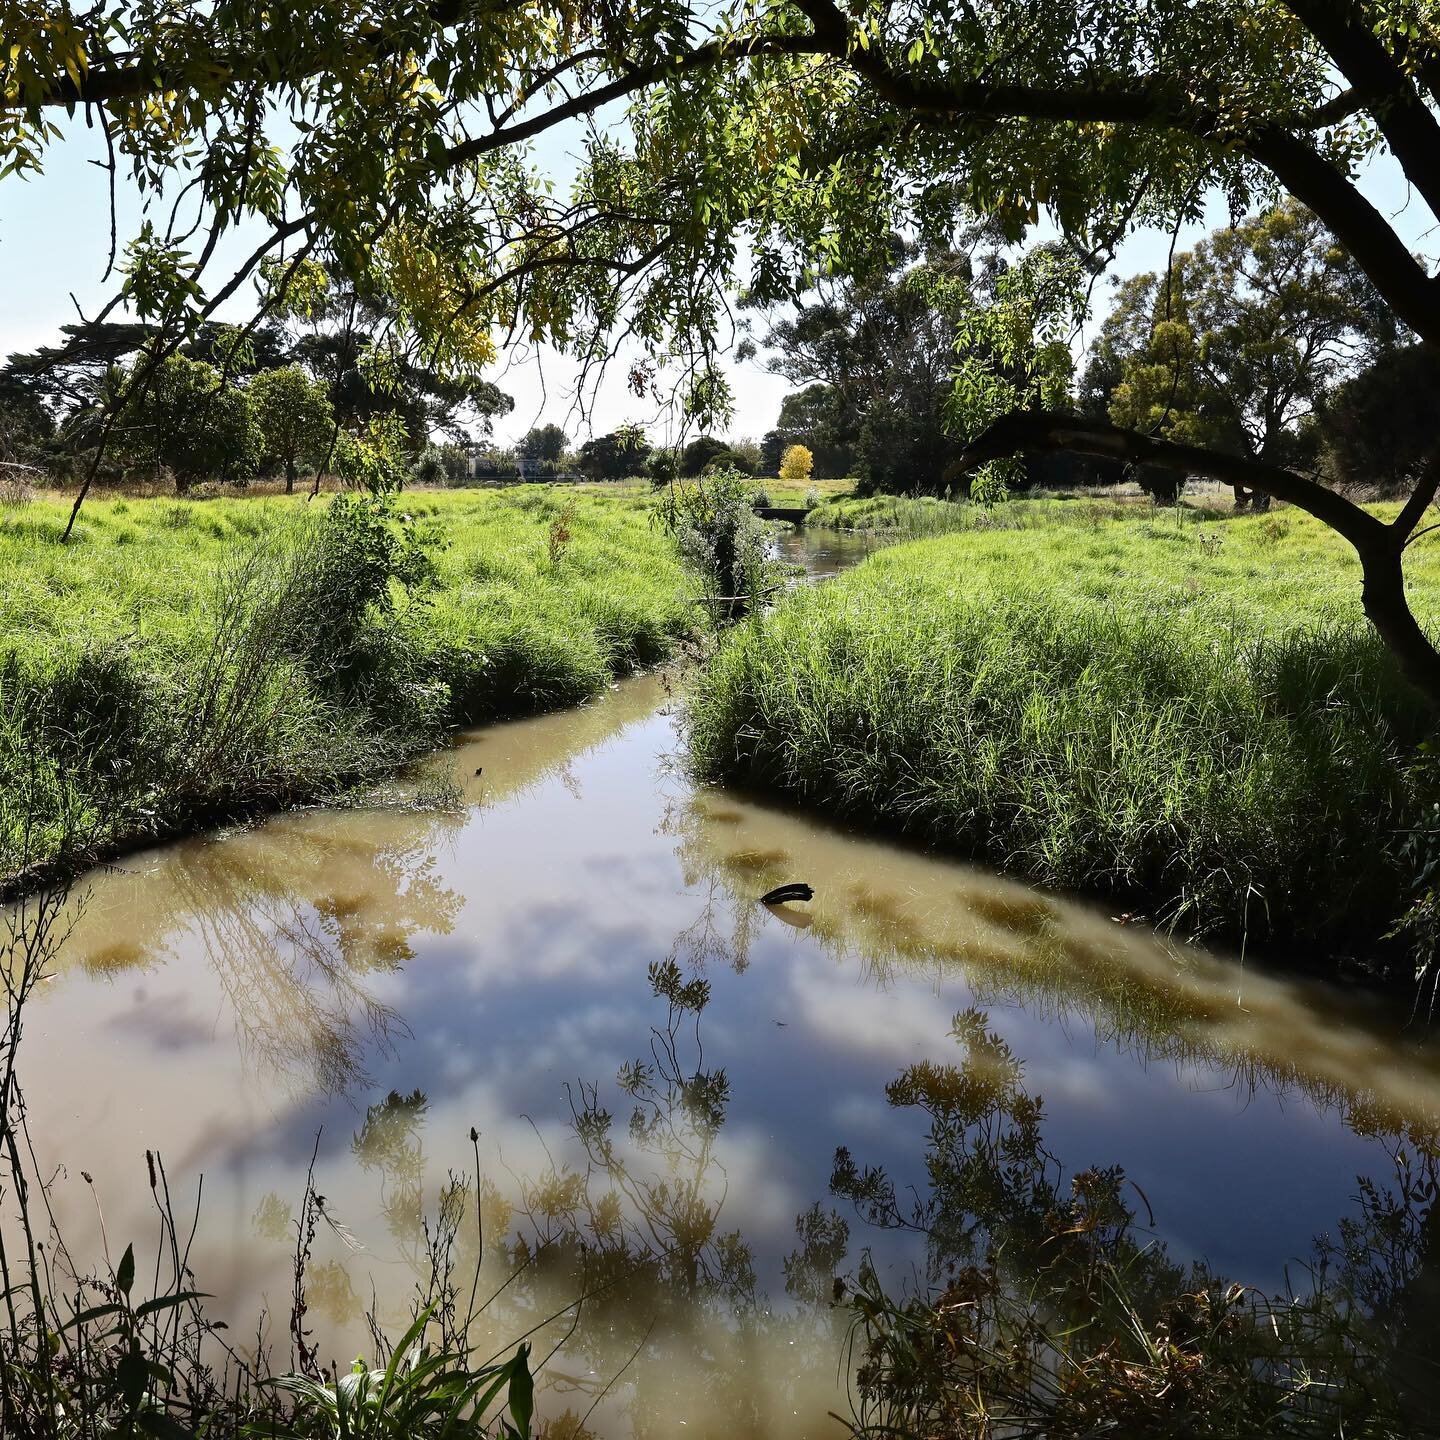 There is a saying all roads lead to Rome but in this story, all catchments lead to the Ocean. It seems after a decade and a half of projects about water quality in the Bays, I&rsquo;ve swum up Elster Creek in the Dandenong catchment to become very in